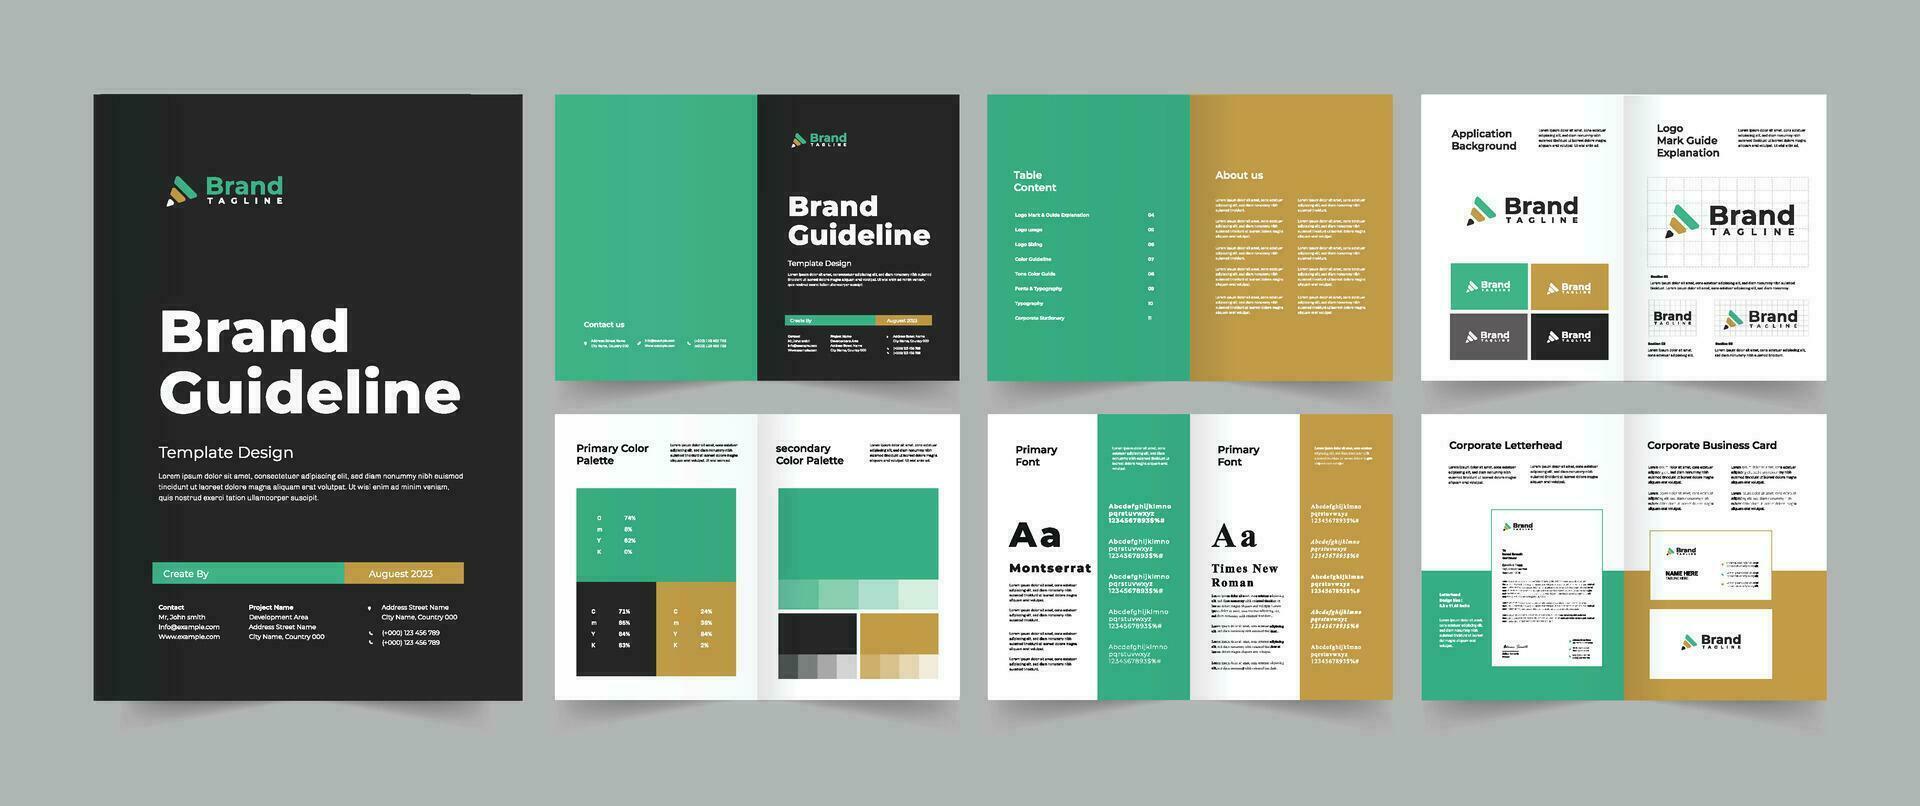 Brand Guideline Template vector